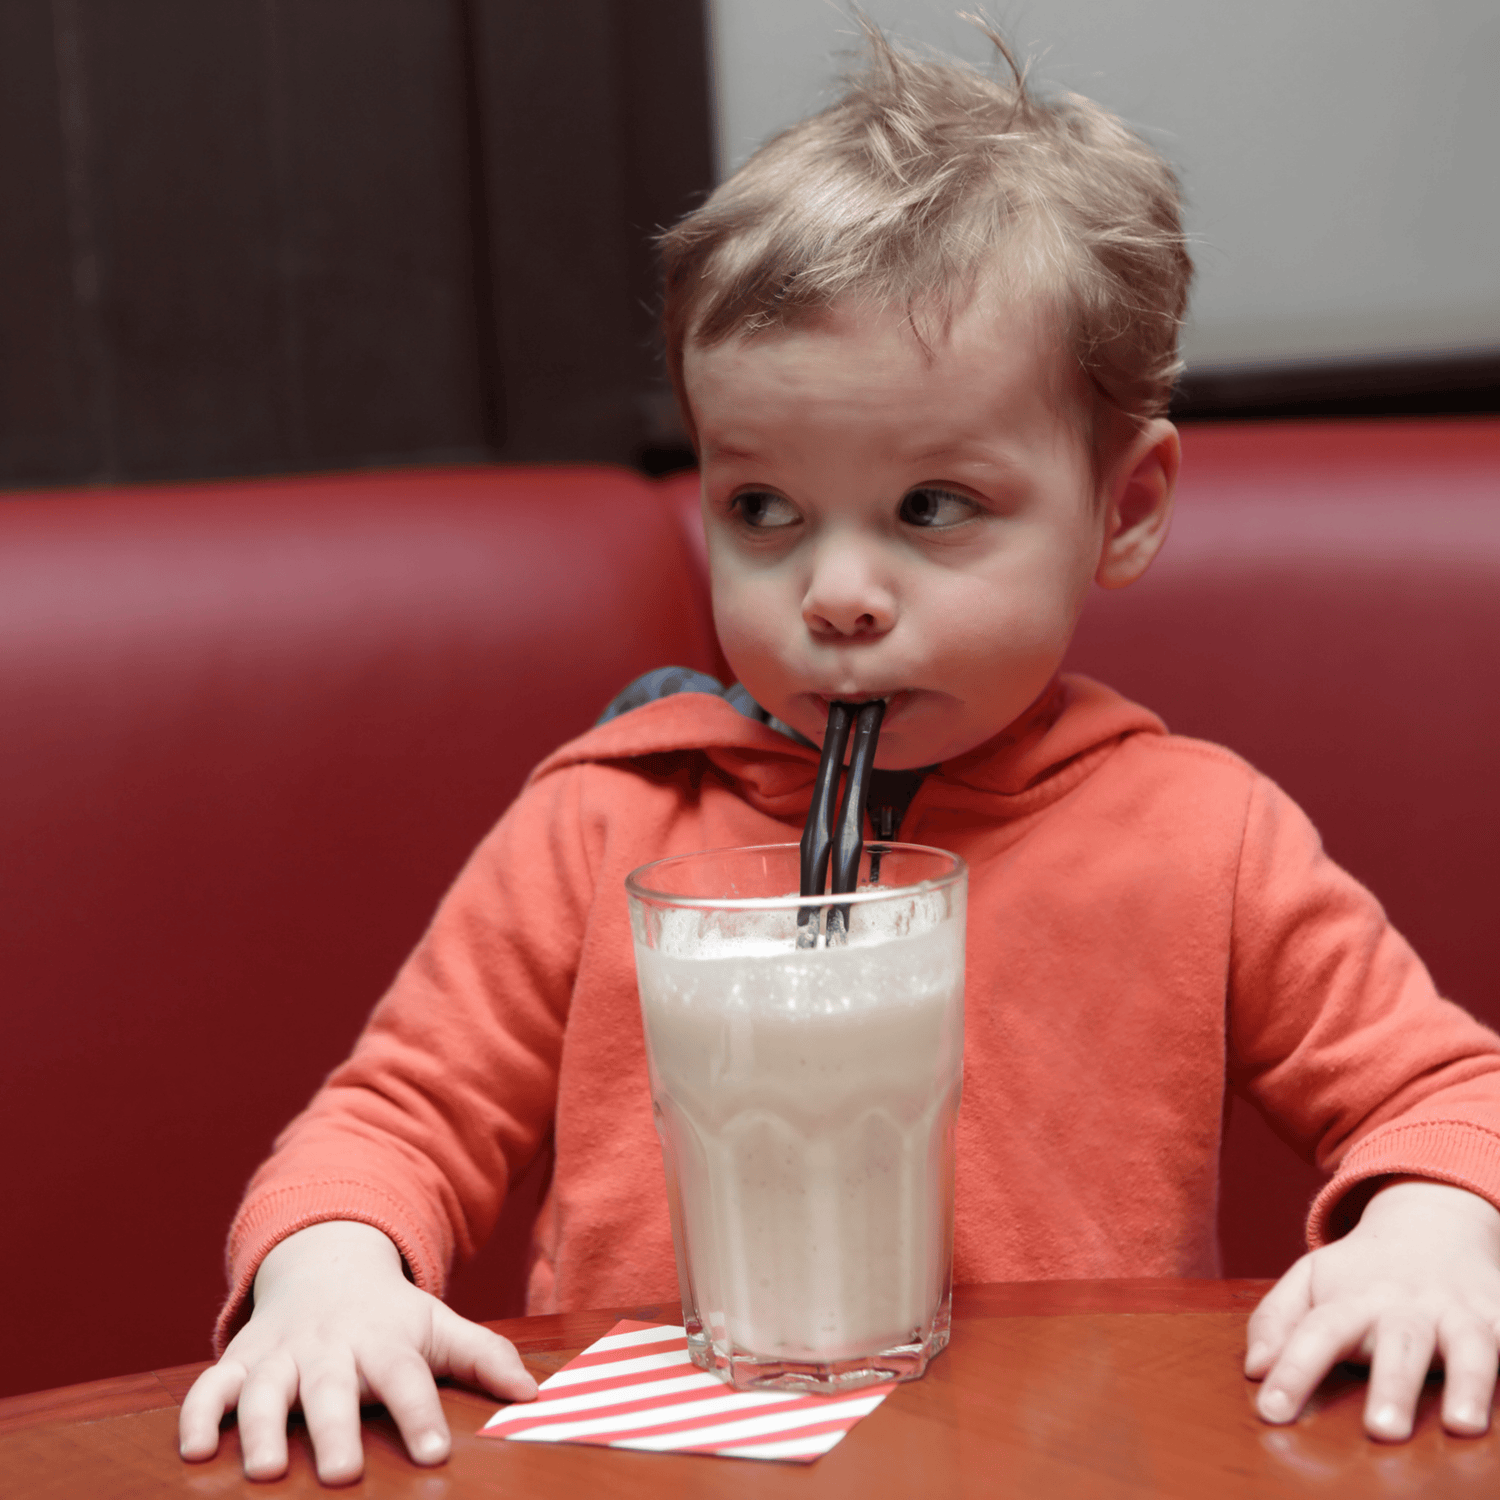 How to make nutritional shakes for your kids